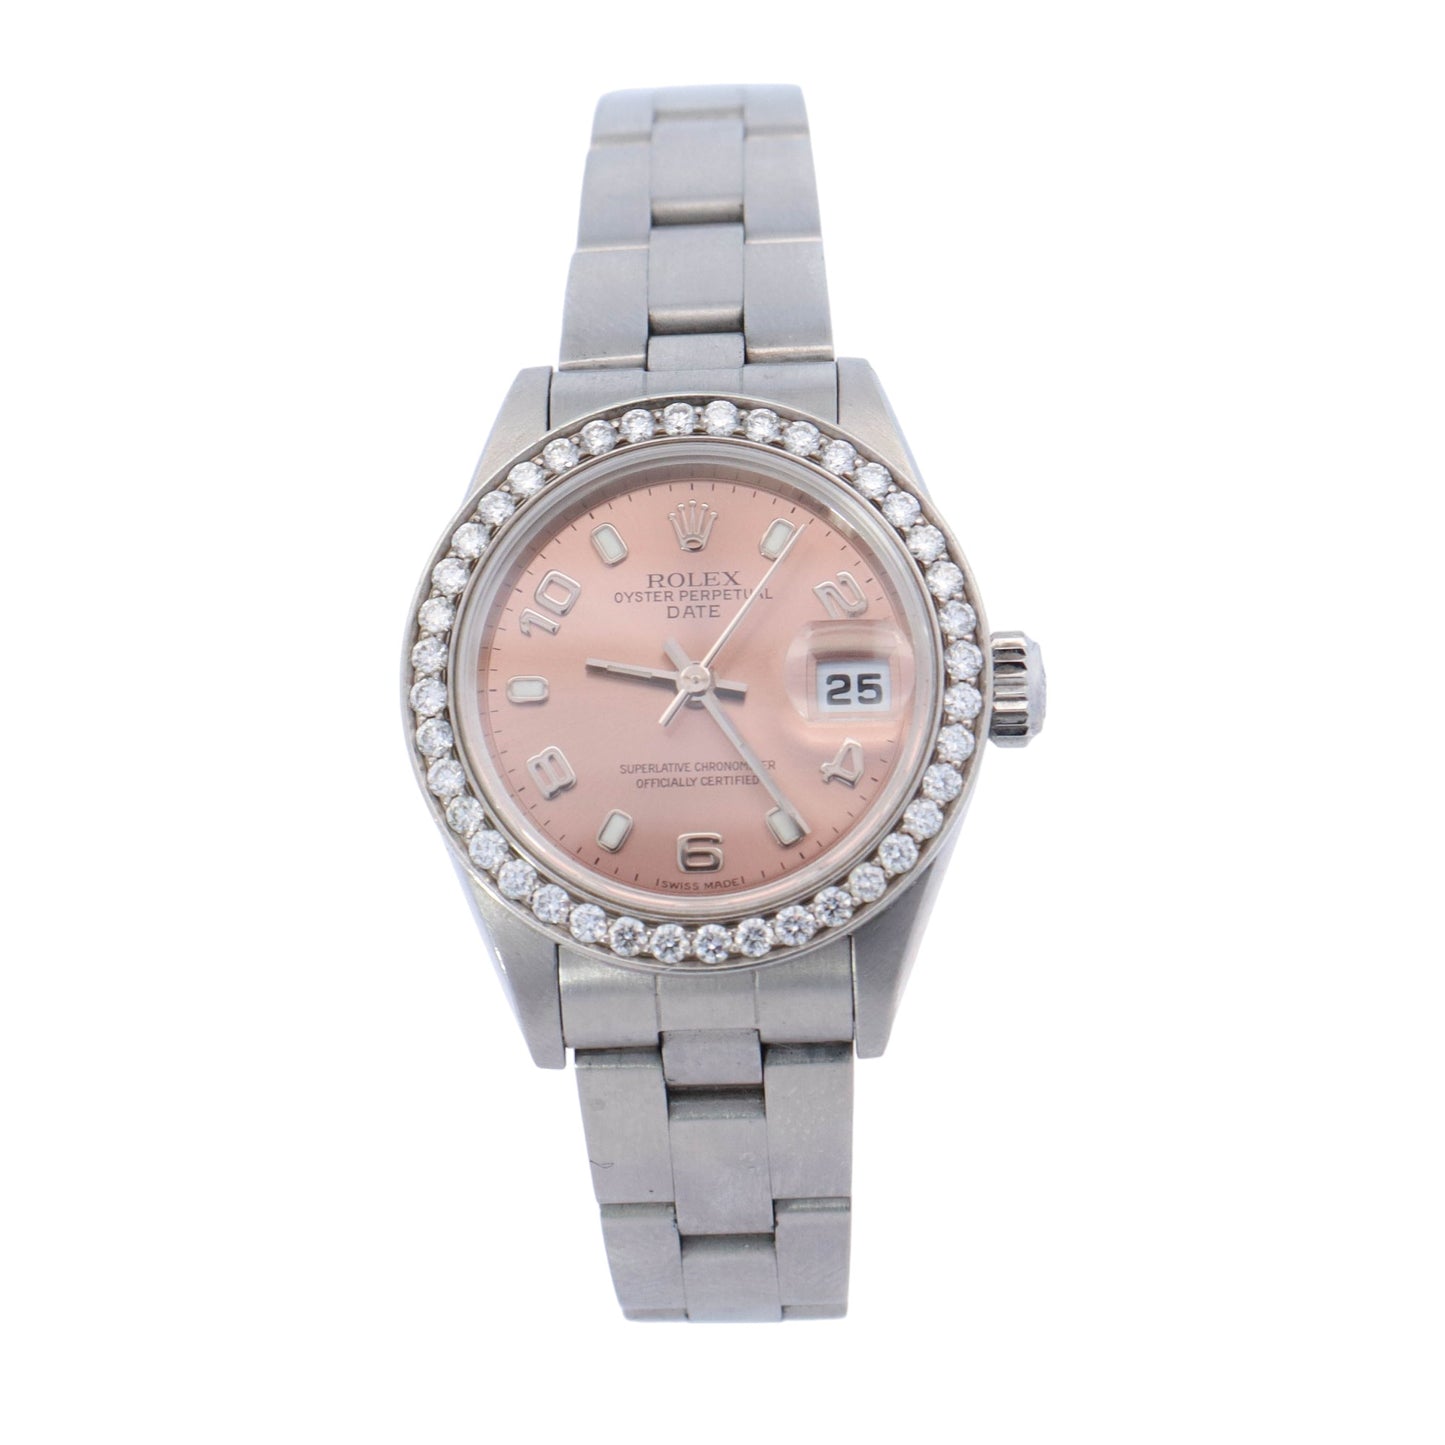 Rolex Oyster Perpetual Date Stainless Steel 26mm Salmon Arabic and Stick Dial Watch Reference #: 79190 - Happy Jewelers Fine Jewelry Lifetime Warranty